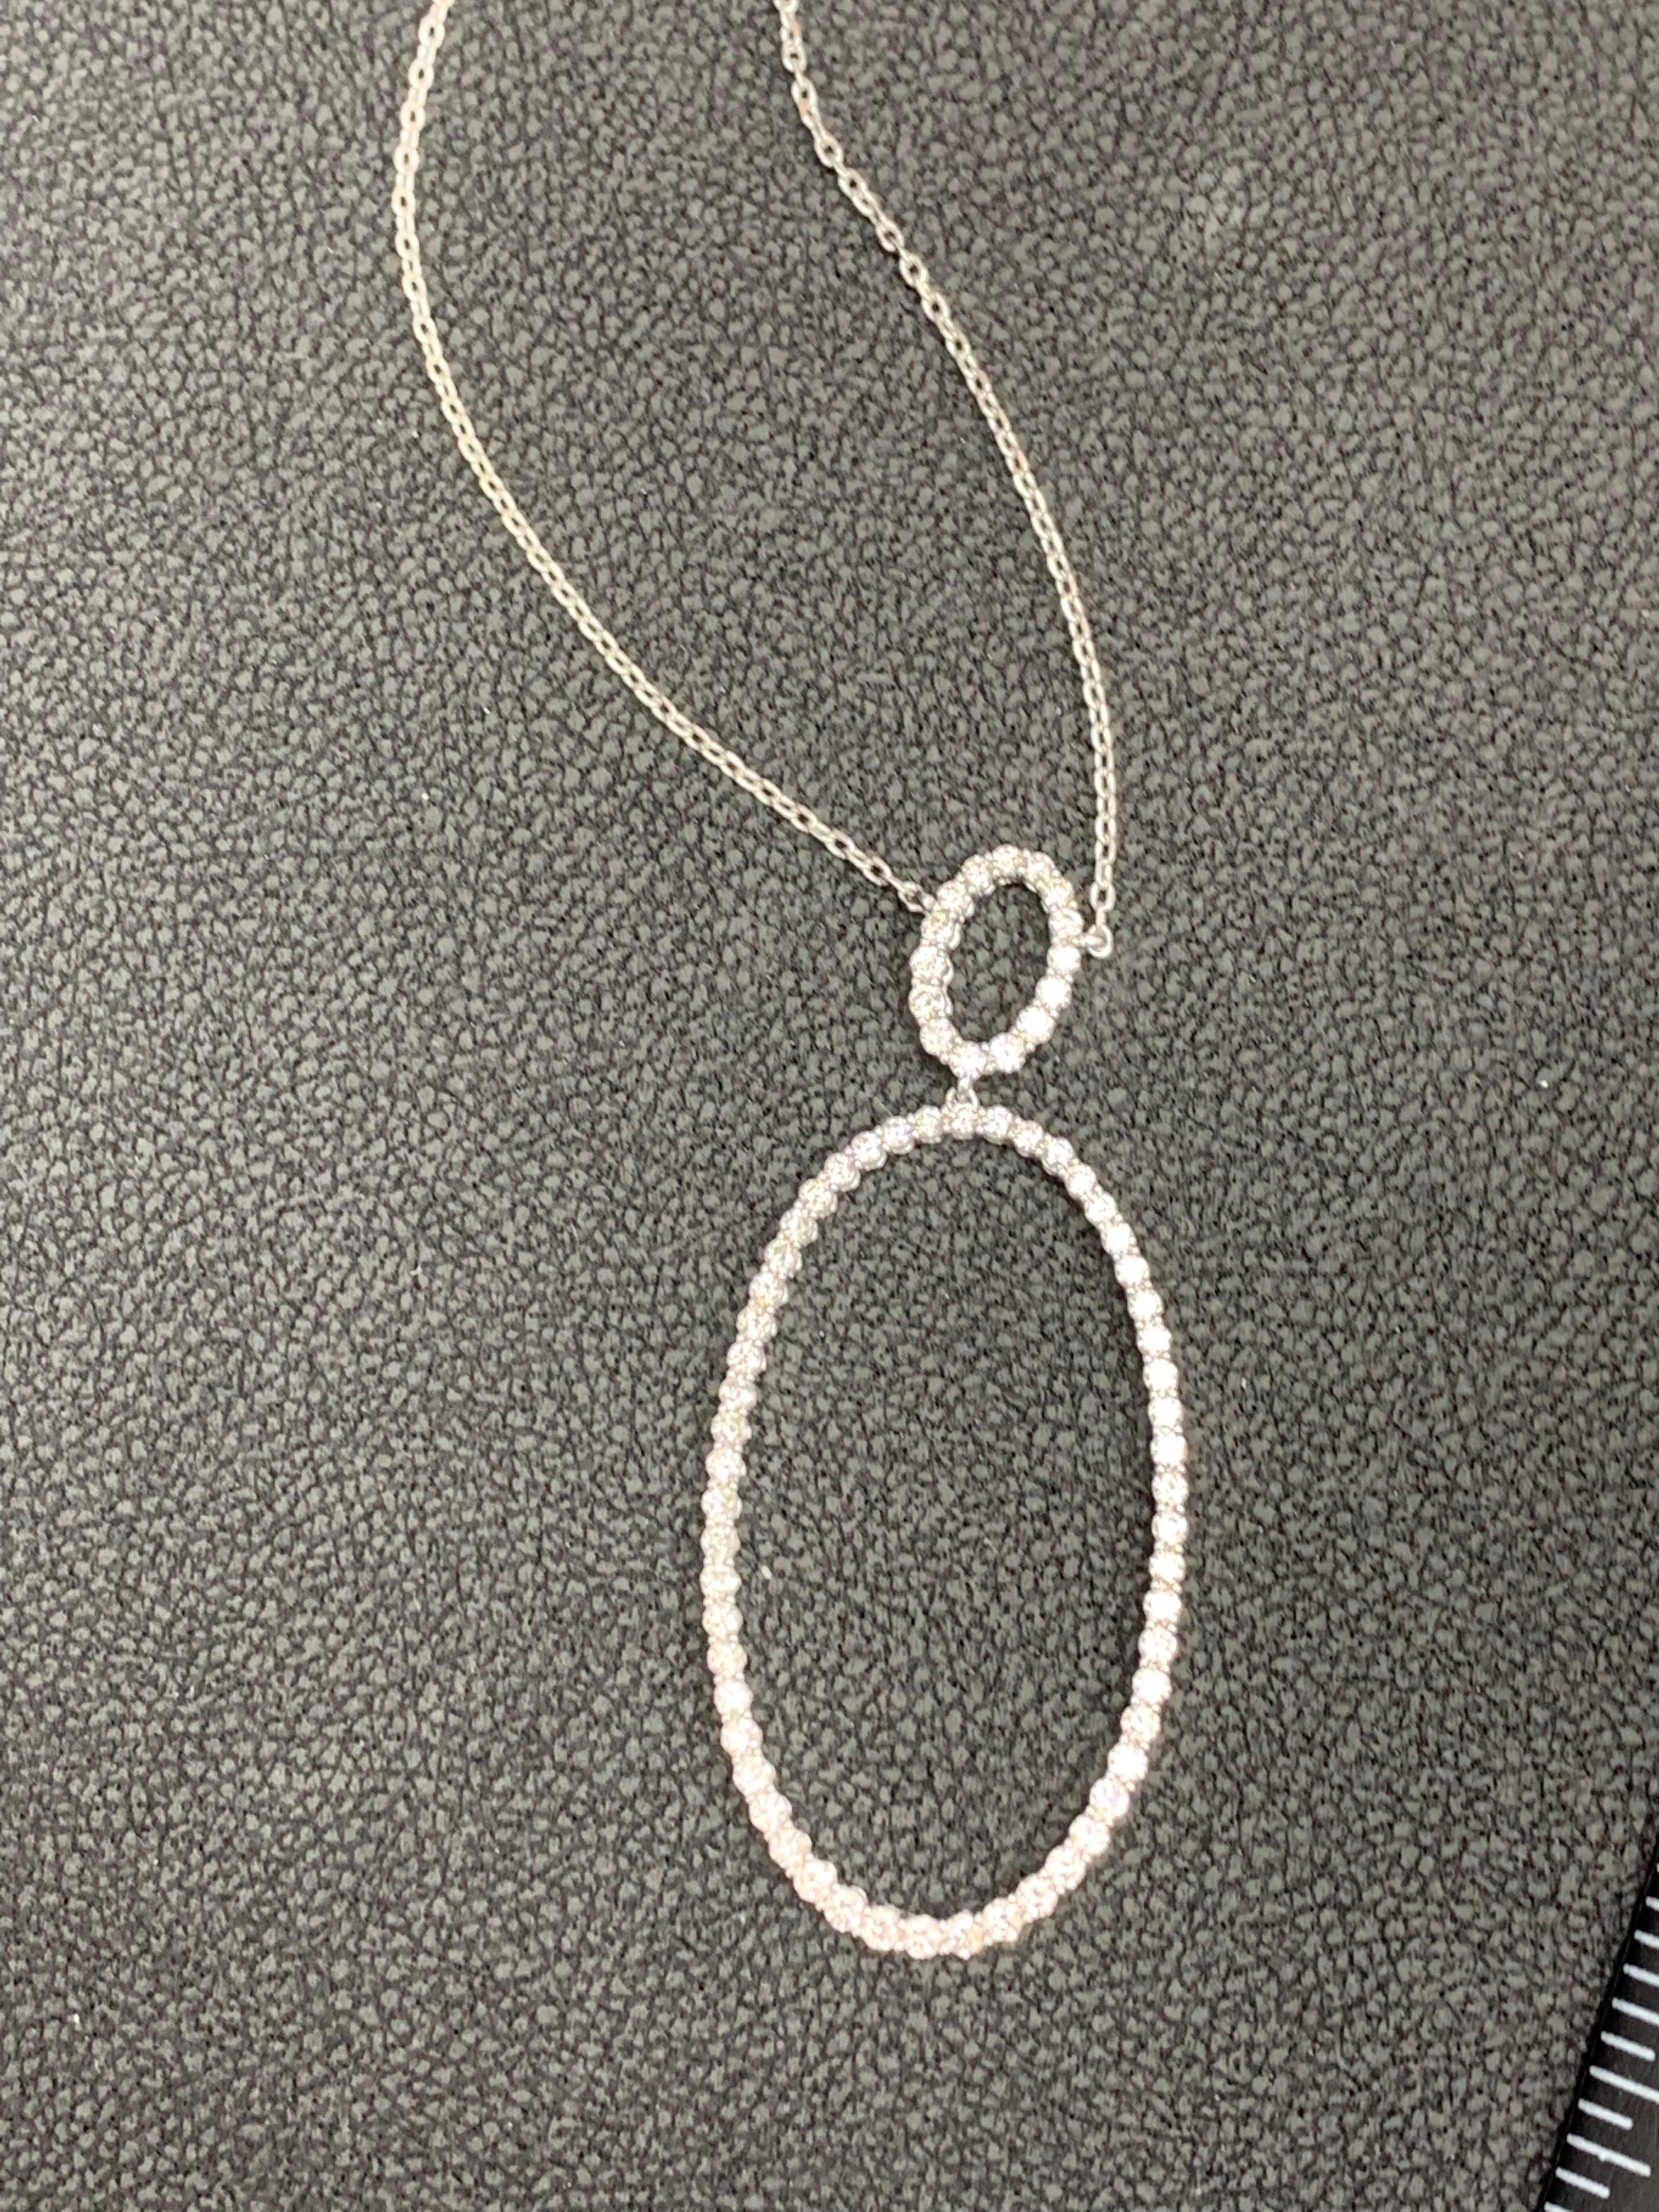 Features an open work oval design pendant accented with round brilliant diamonds. 69 Diamonds weigh 1.21 carats total. Made in platinum. 18 inch chain.